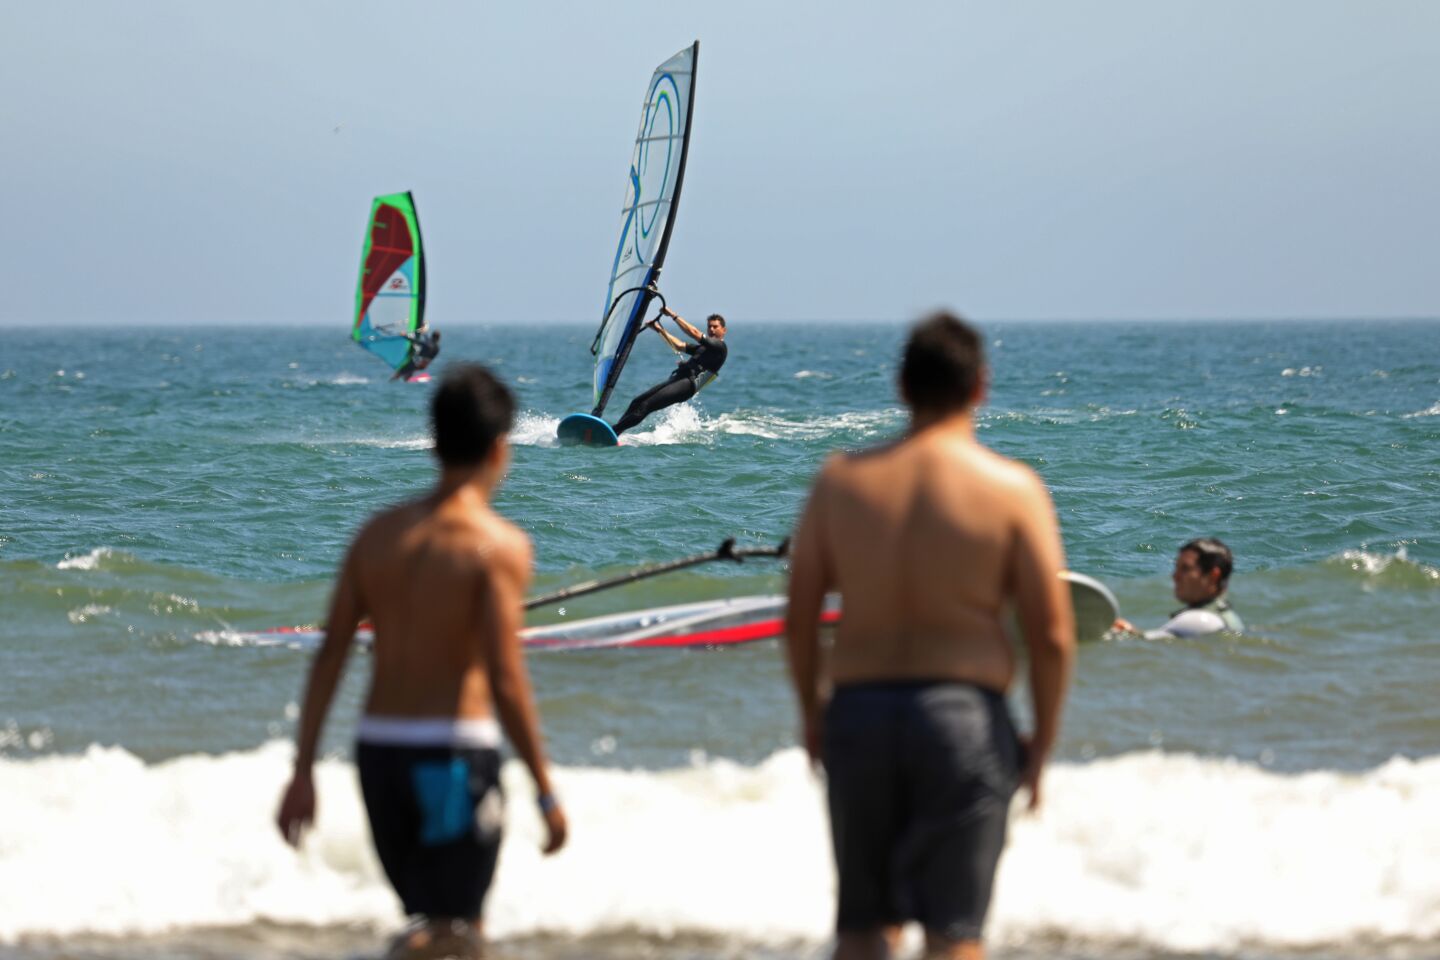 Windsurfers sail off Cabrillo Beach in San Pedro as people watch from the beach.